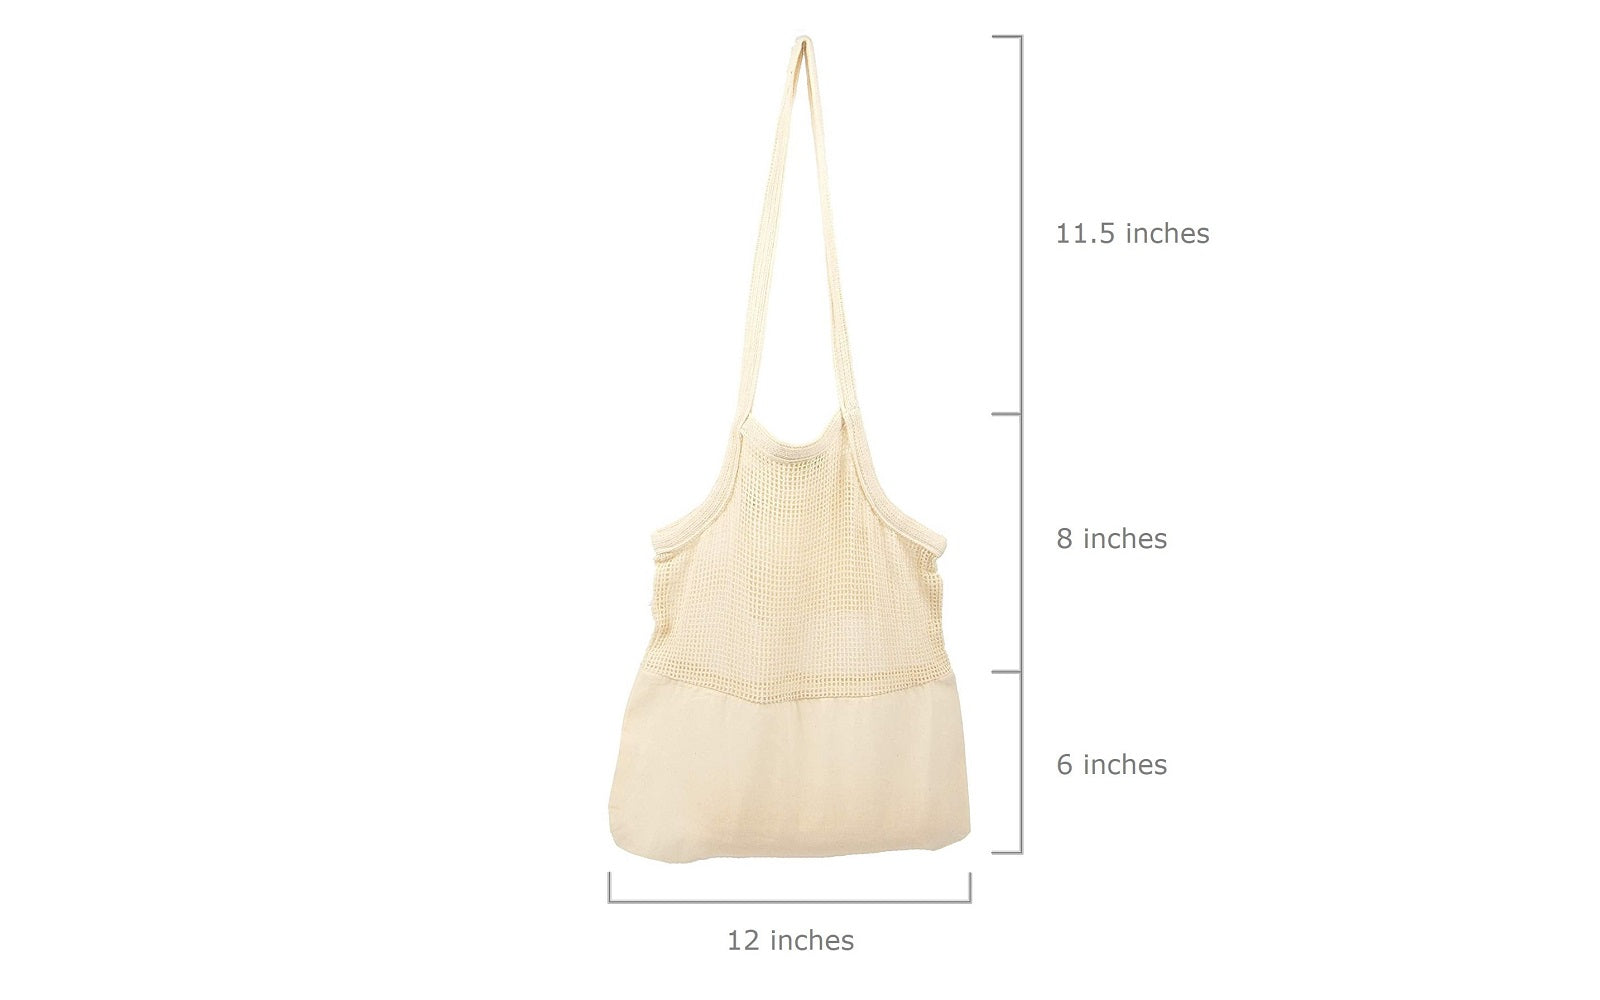 Reusable and washable Tote Bag Dimensions